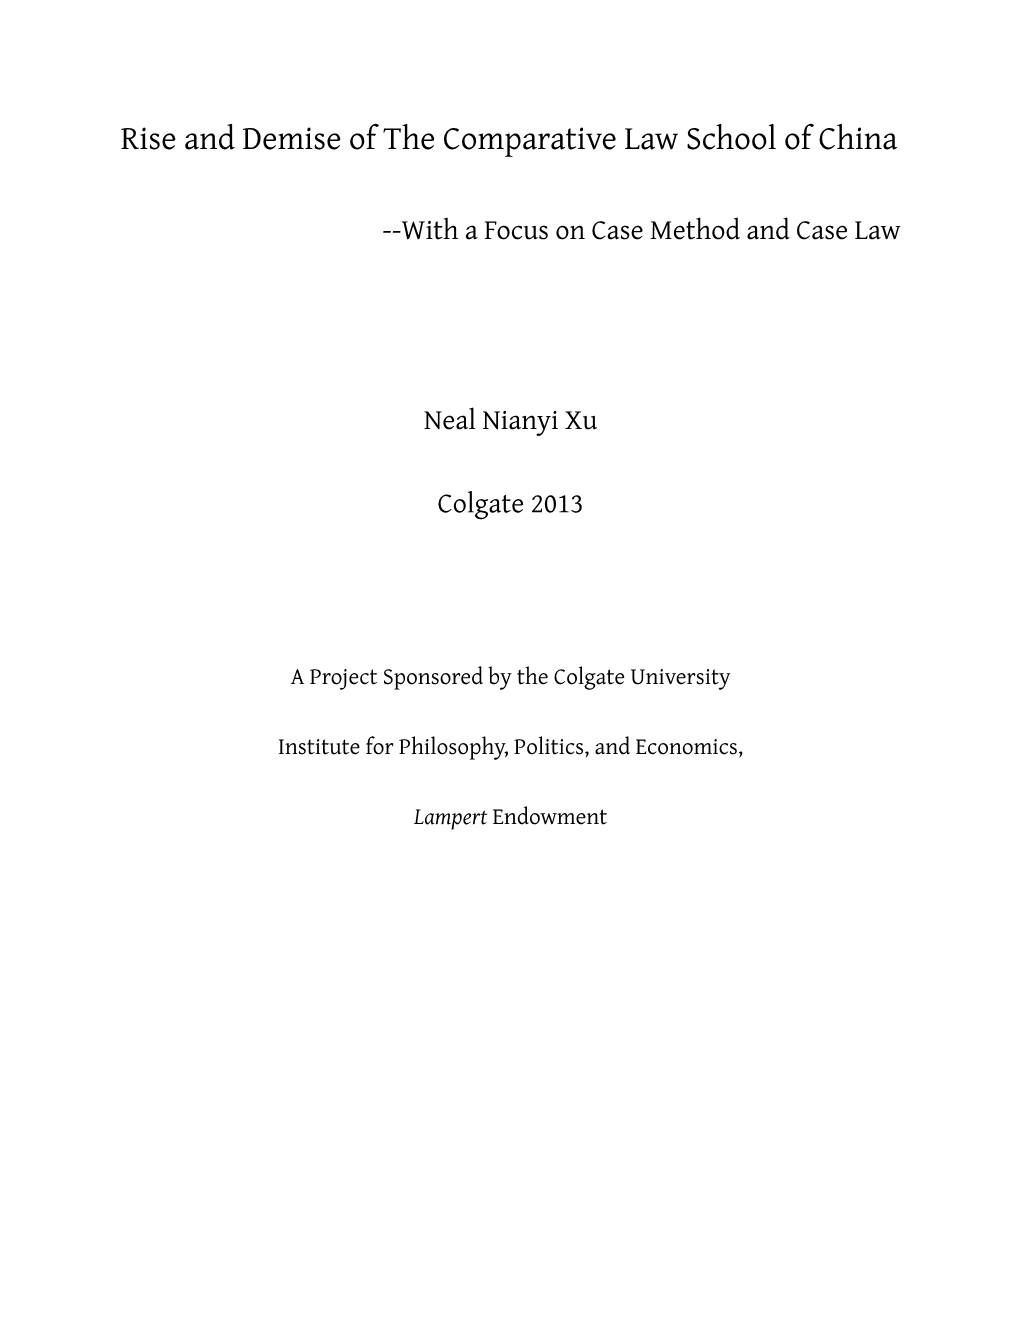 Case Method Legal Education in China